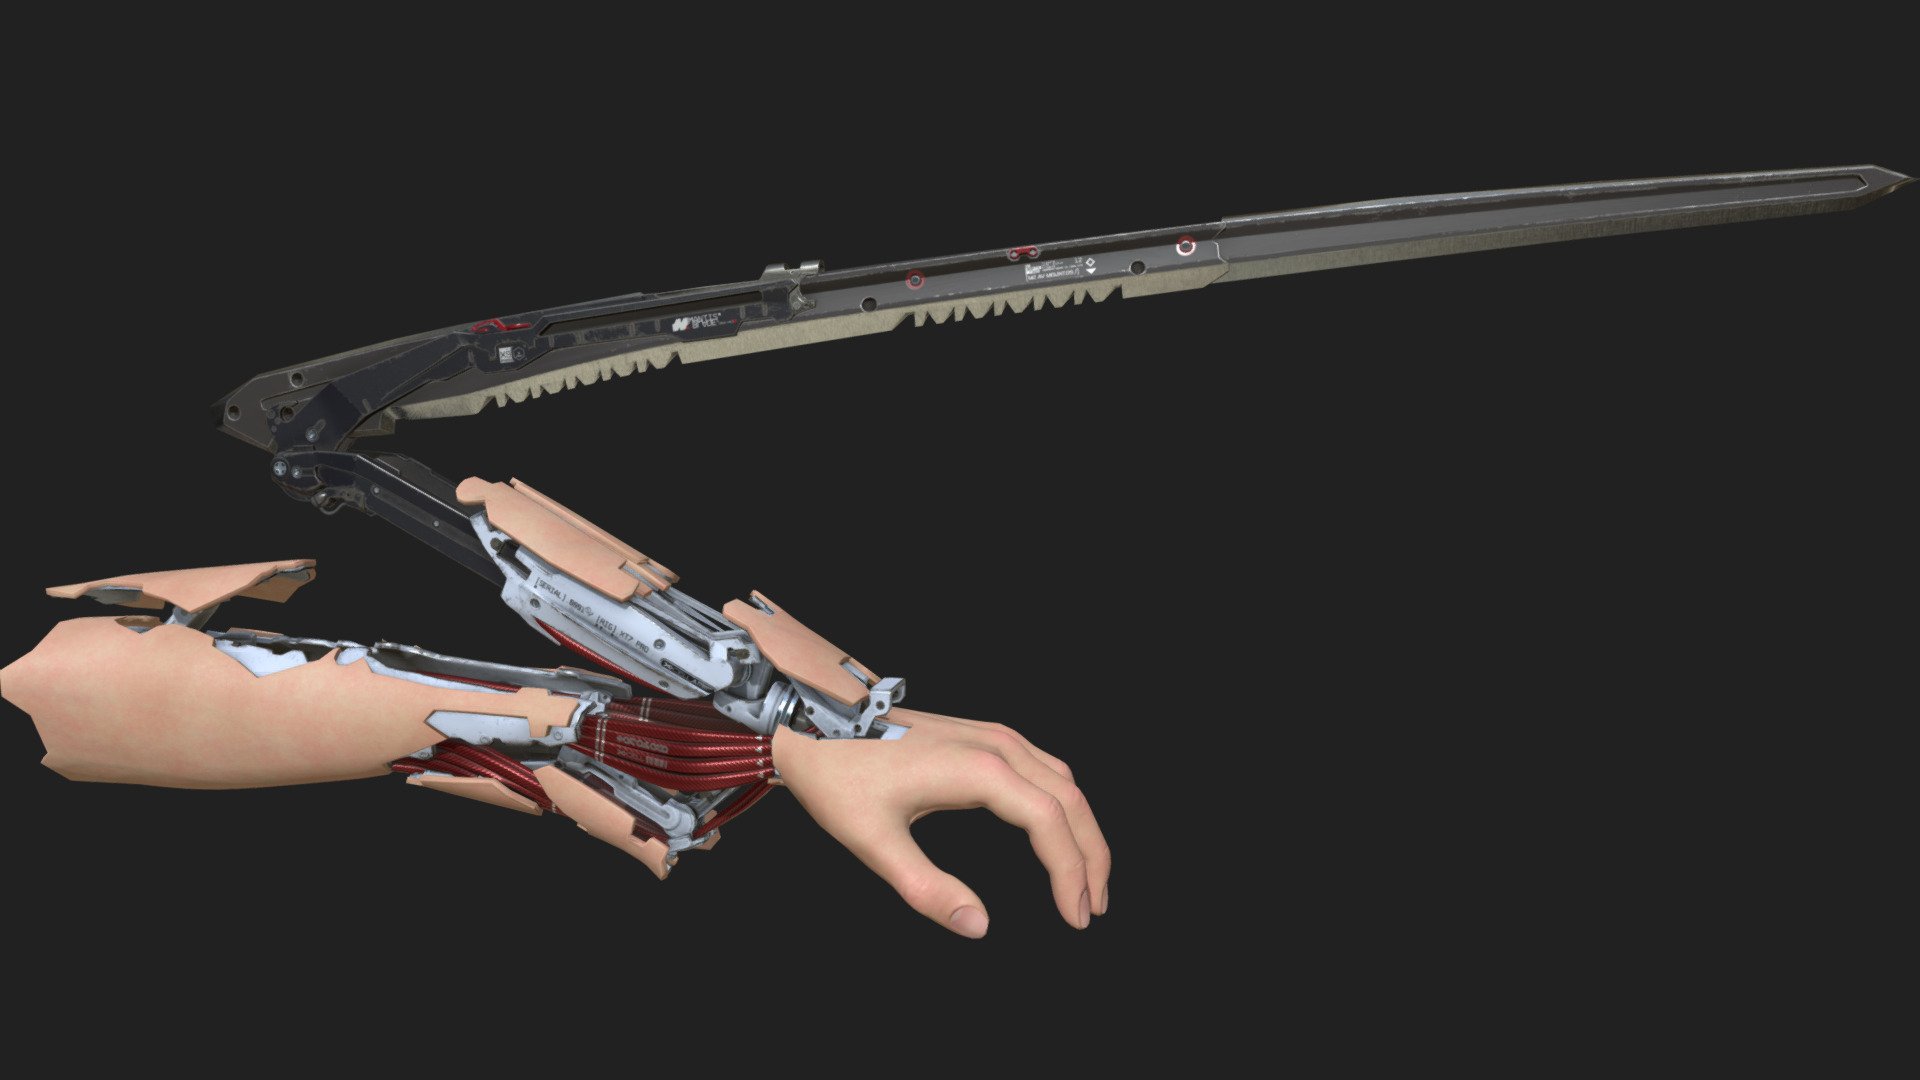 Fan art of Mantis Blade from Cyberpunk 2077 game. Modeled in Blender and textured in Substance 3D Painter 3d model